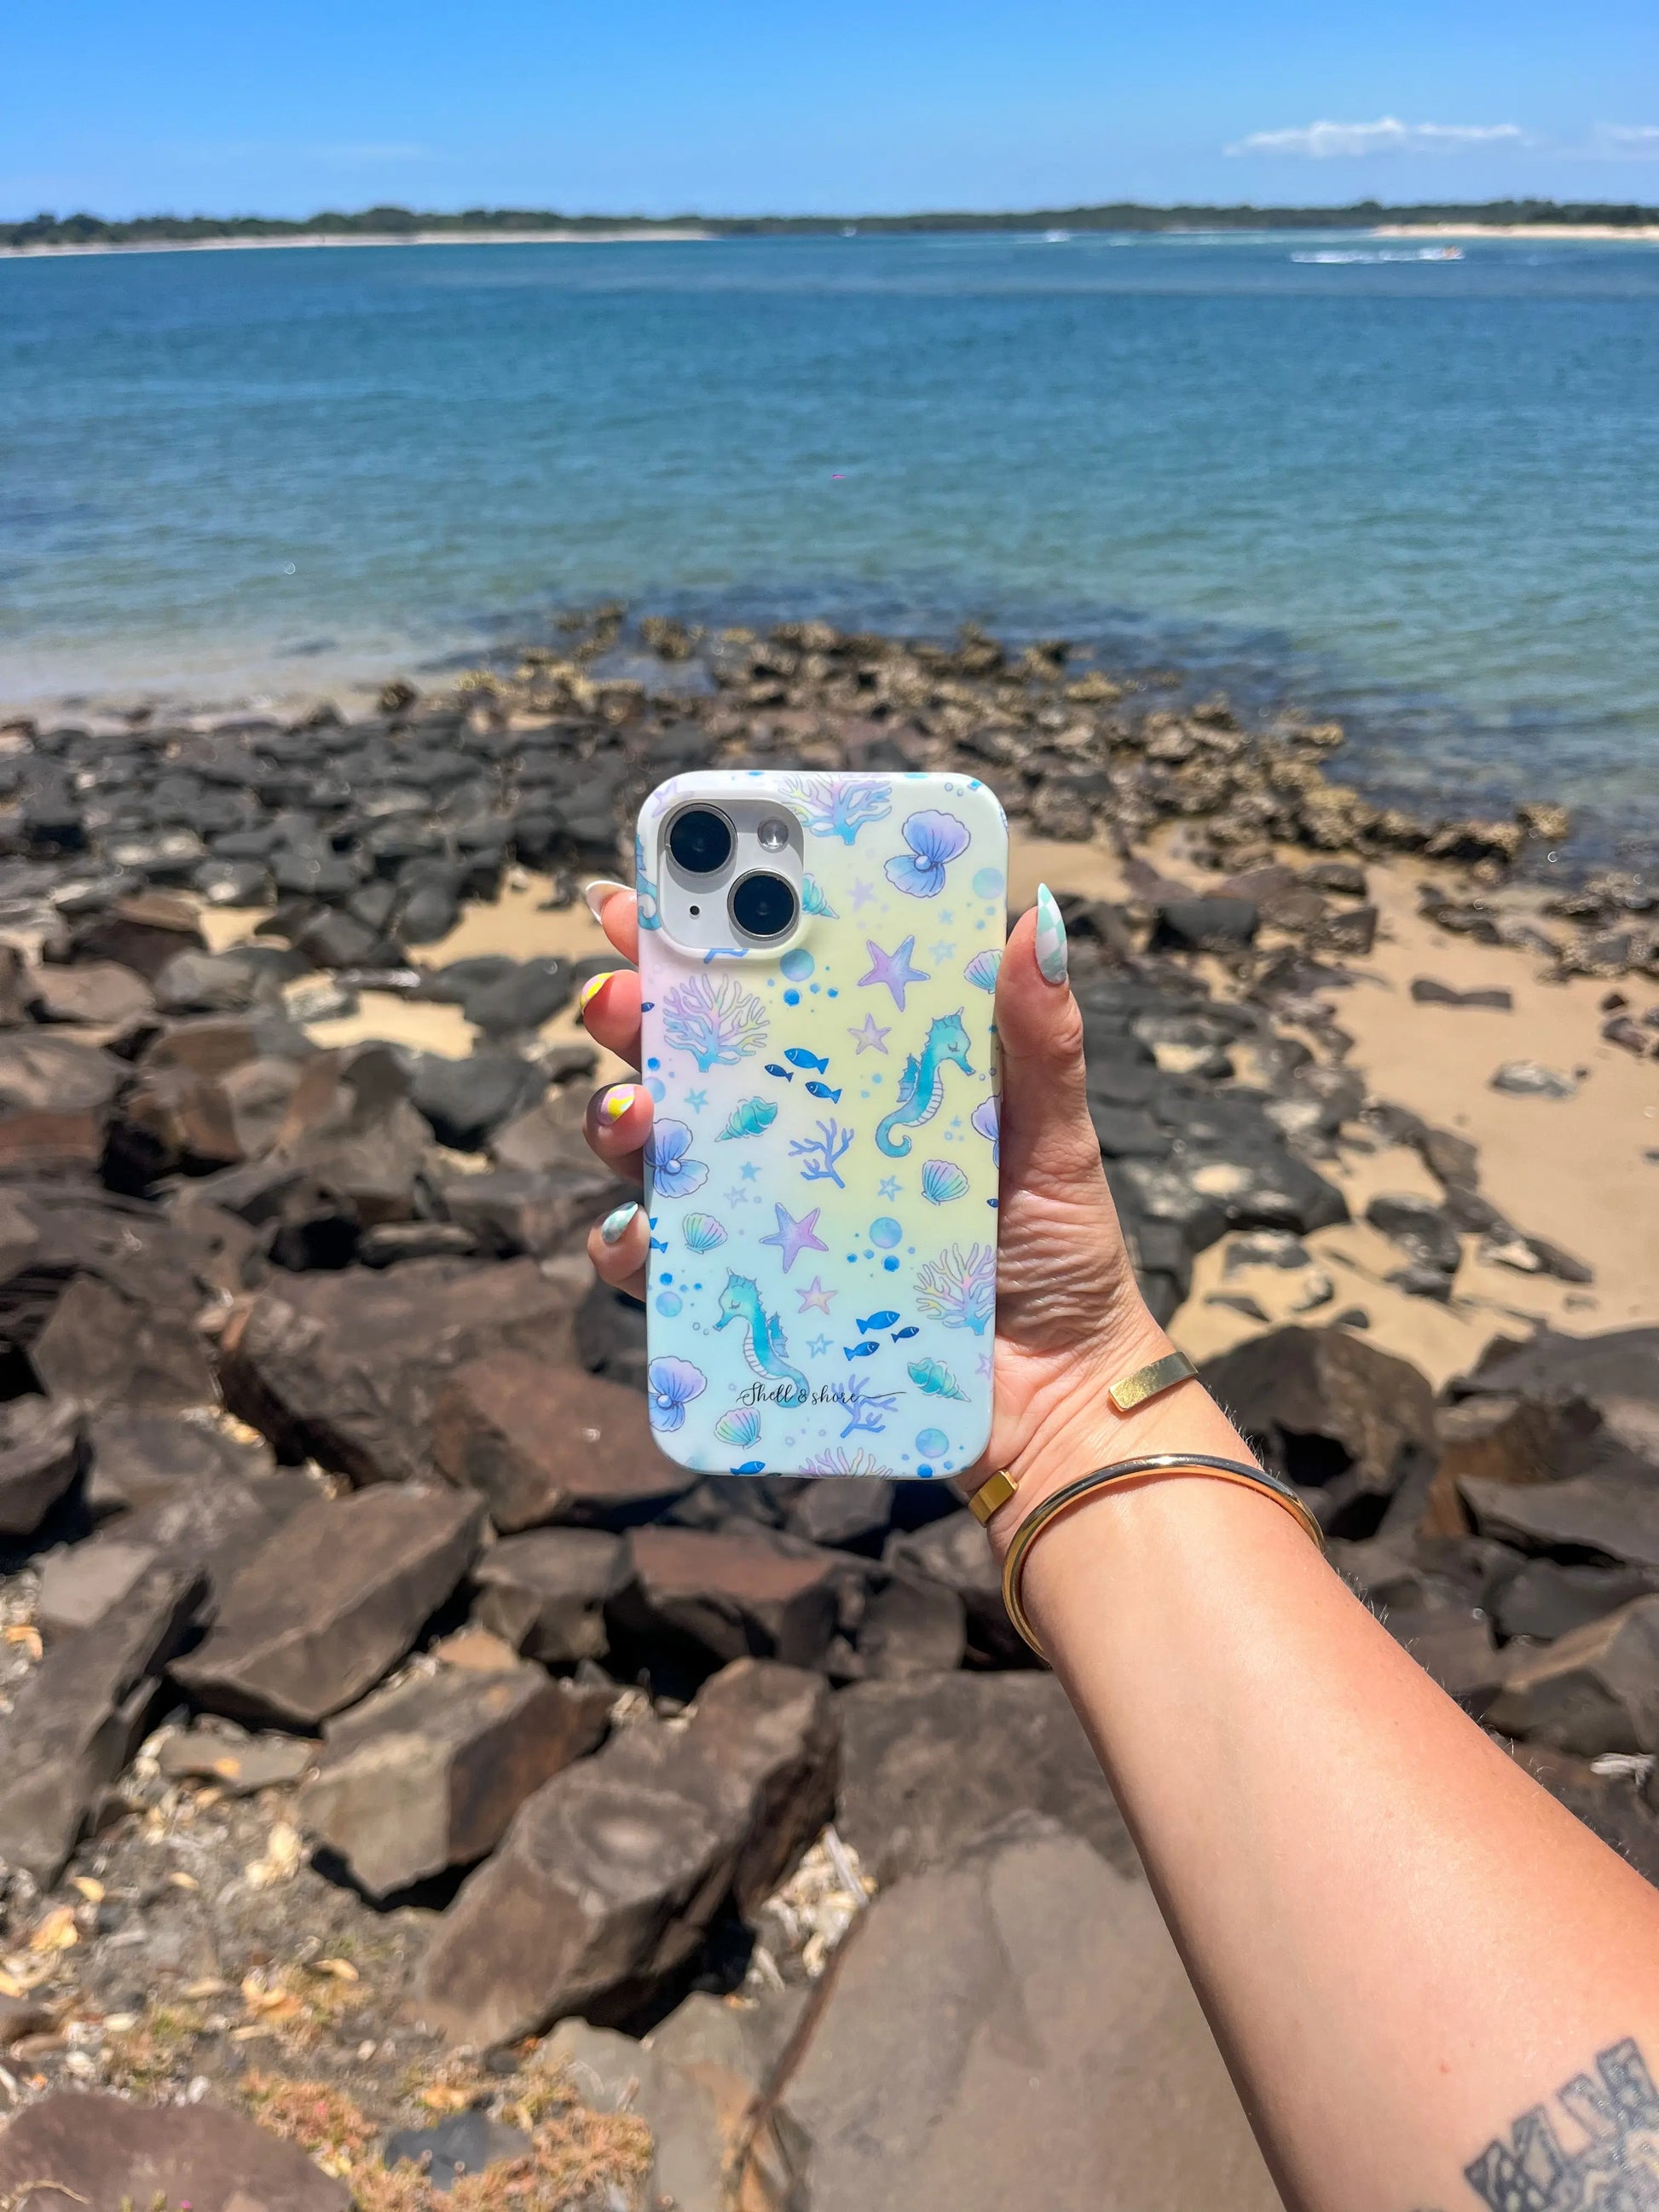 Marine Treasures iPhone Case Shell And Shore